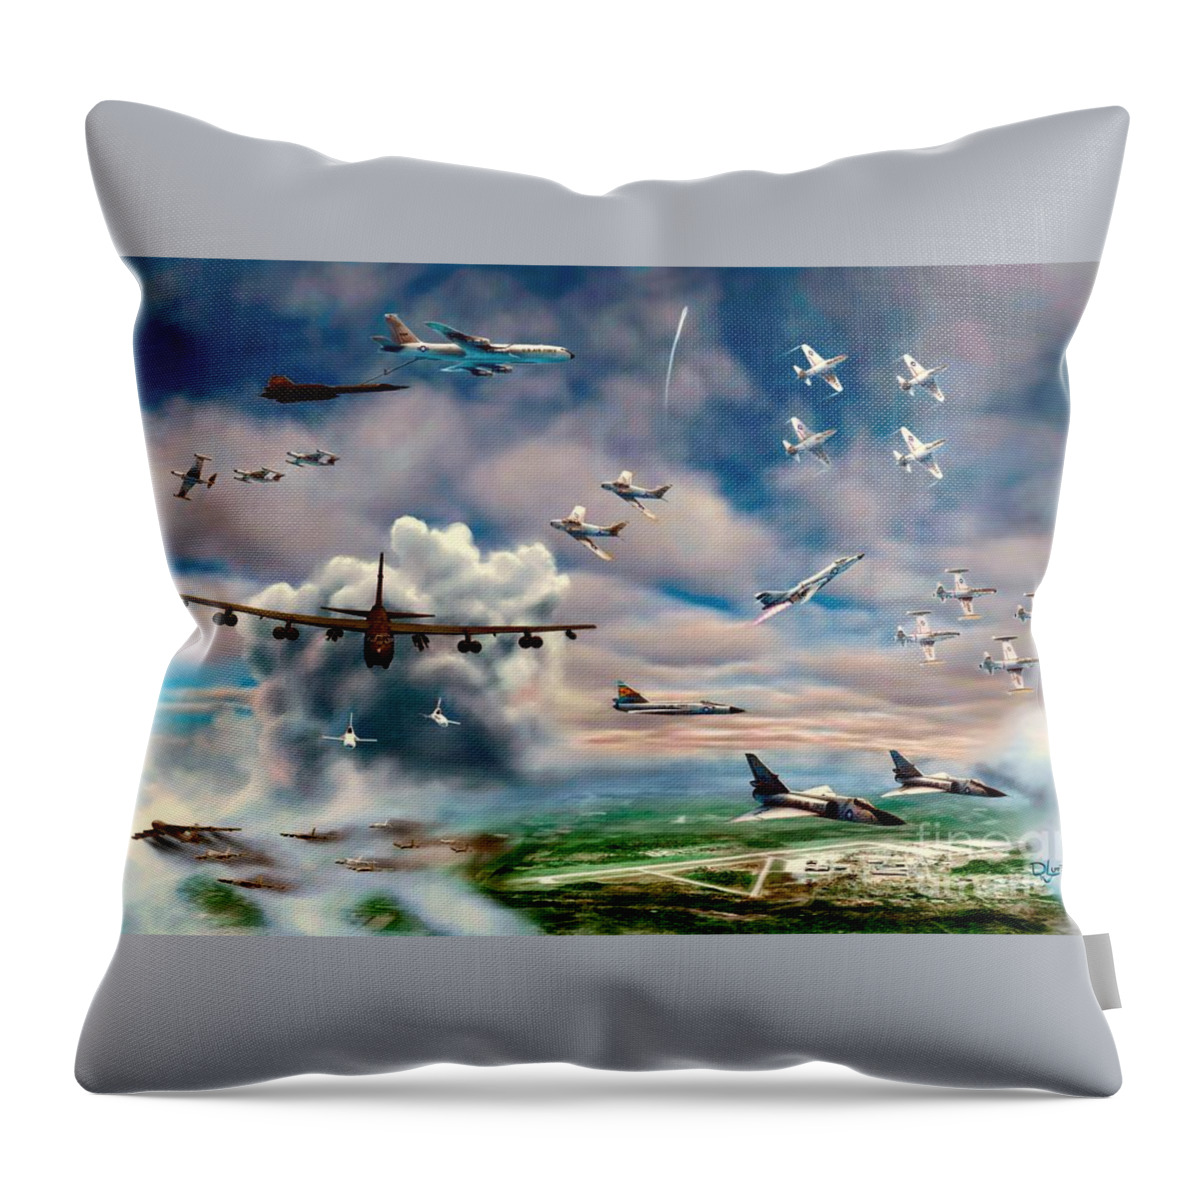 Air Force Base Throw Pillow featuring the painting Griffiss Air Force Base by David Luebbert